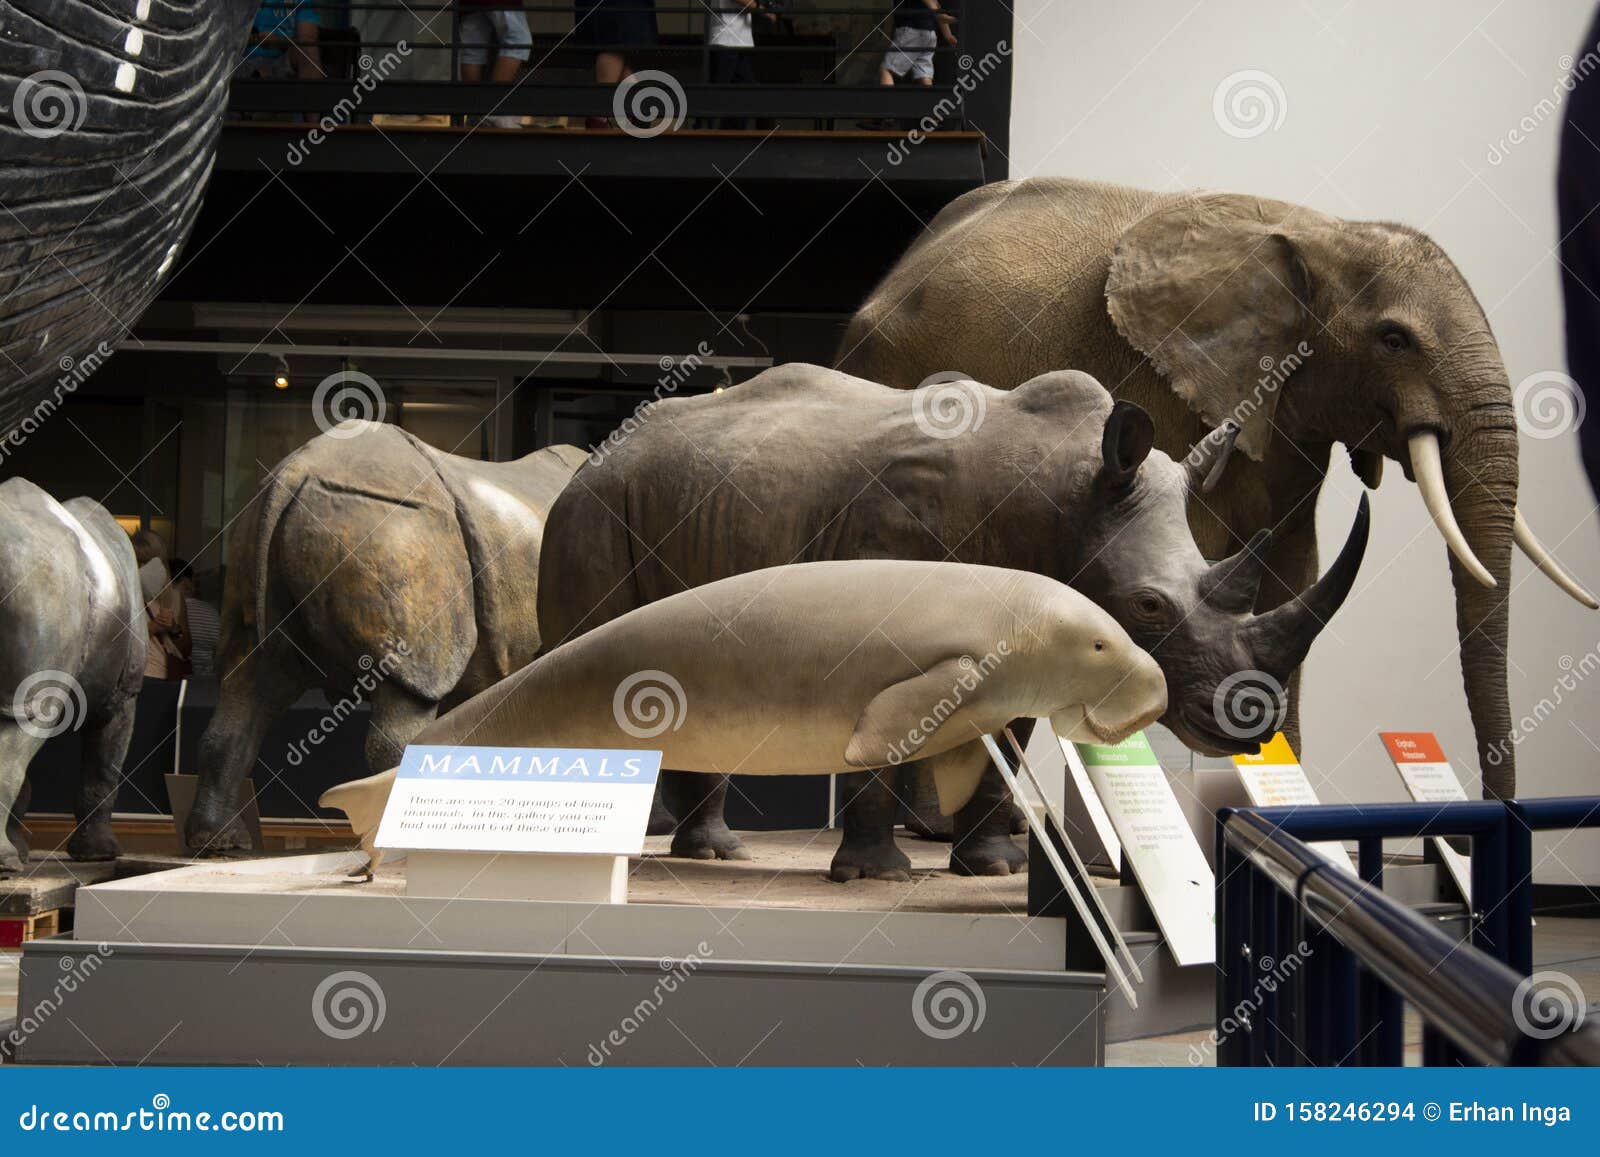 London, UK - August 22, 2019 - Stuffed Animals and Skeletons are Displayed  at the Natural History Museum in London, UK Editorial Stock Image - Image  of famous, london: 158246294